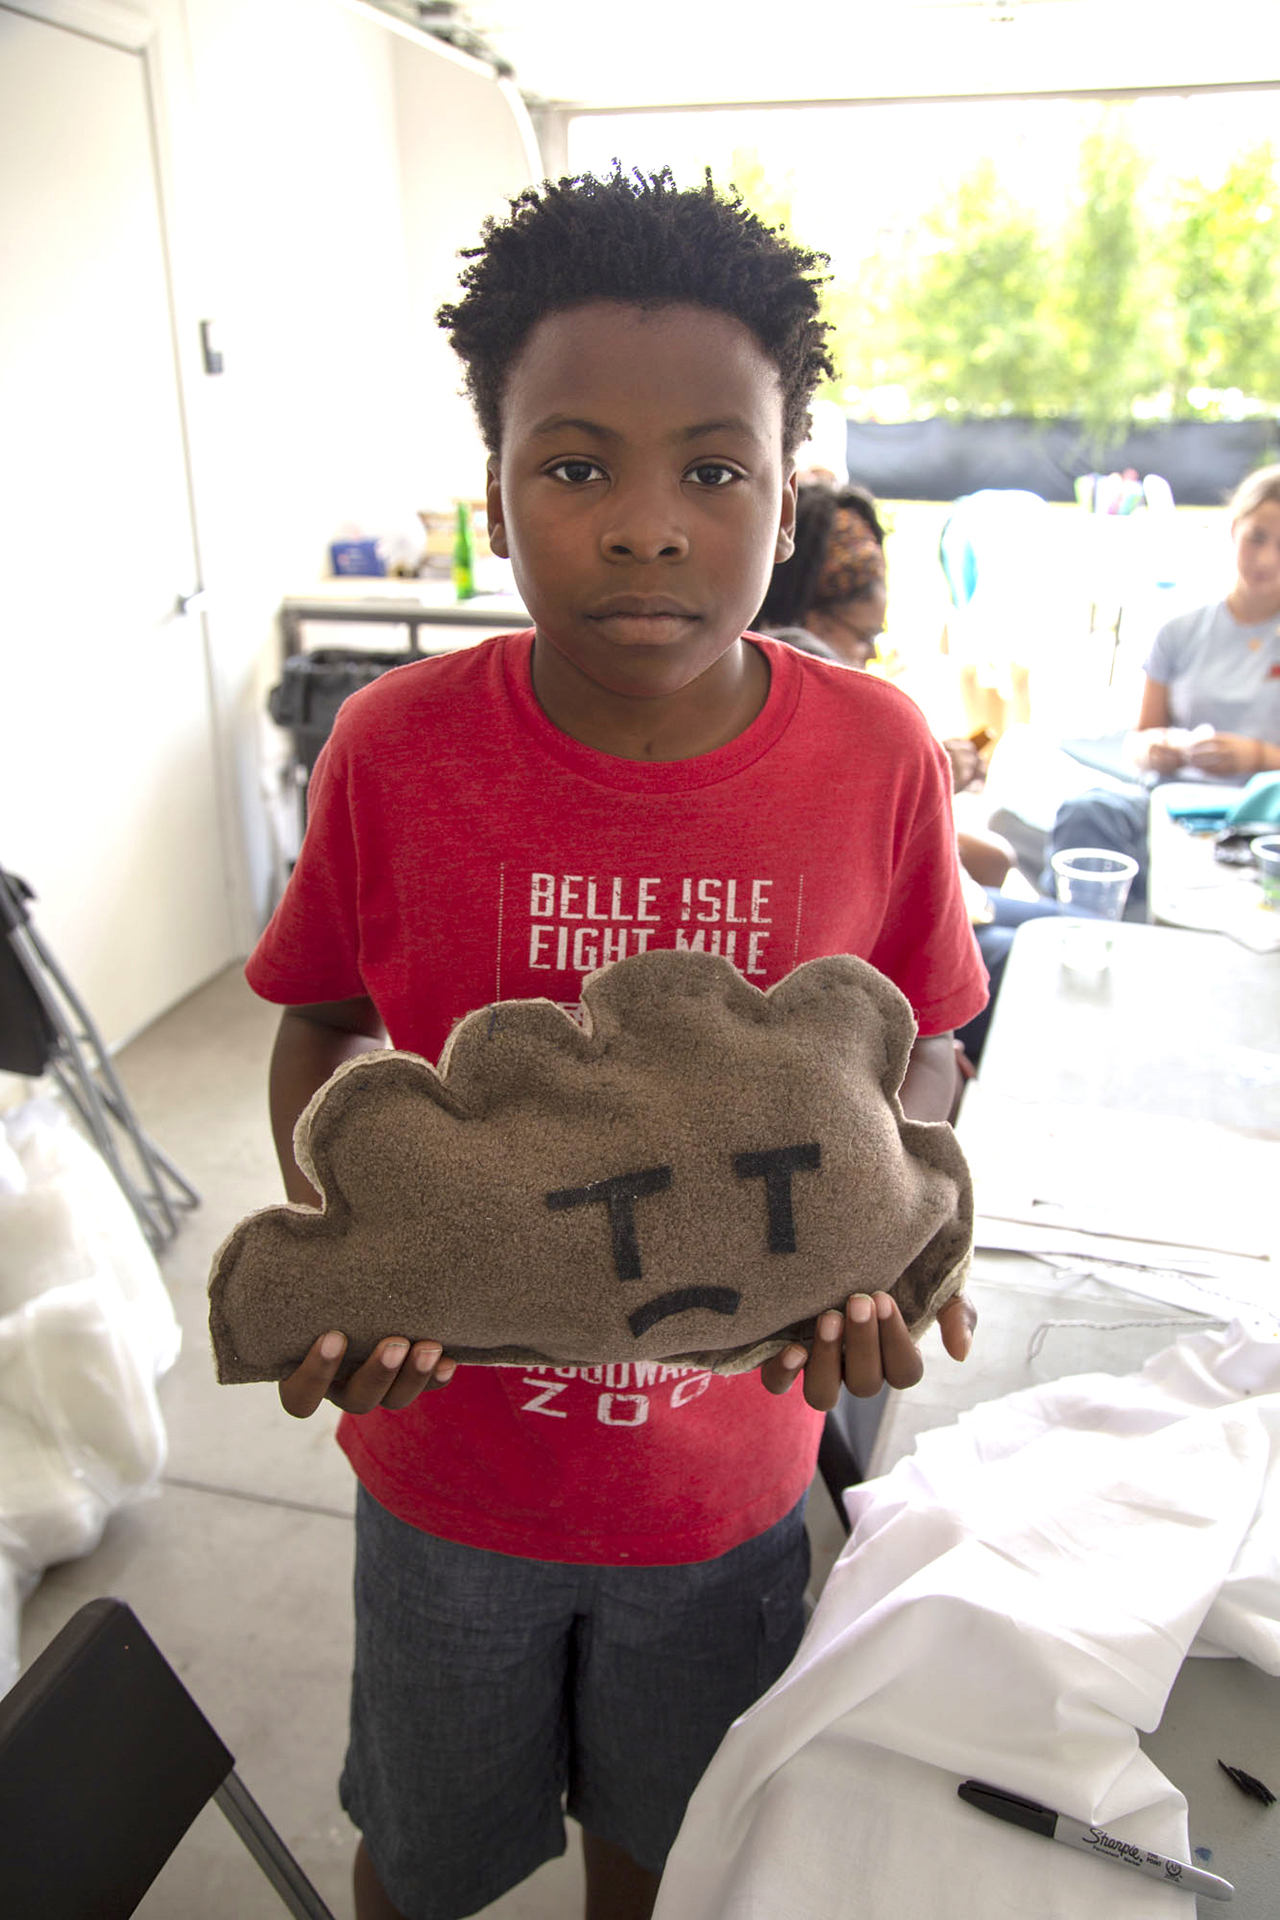 Youth participant in the KAWS EFFECTS: Character Design Summer Camp at MOCAD